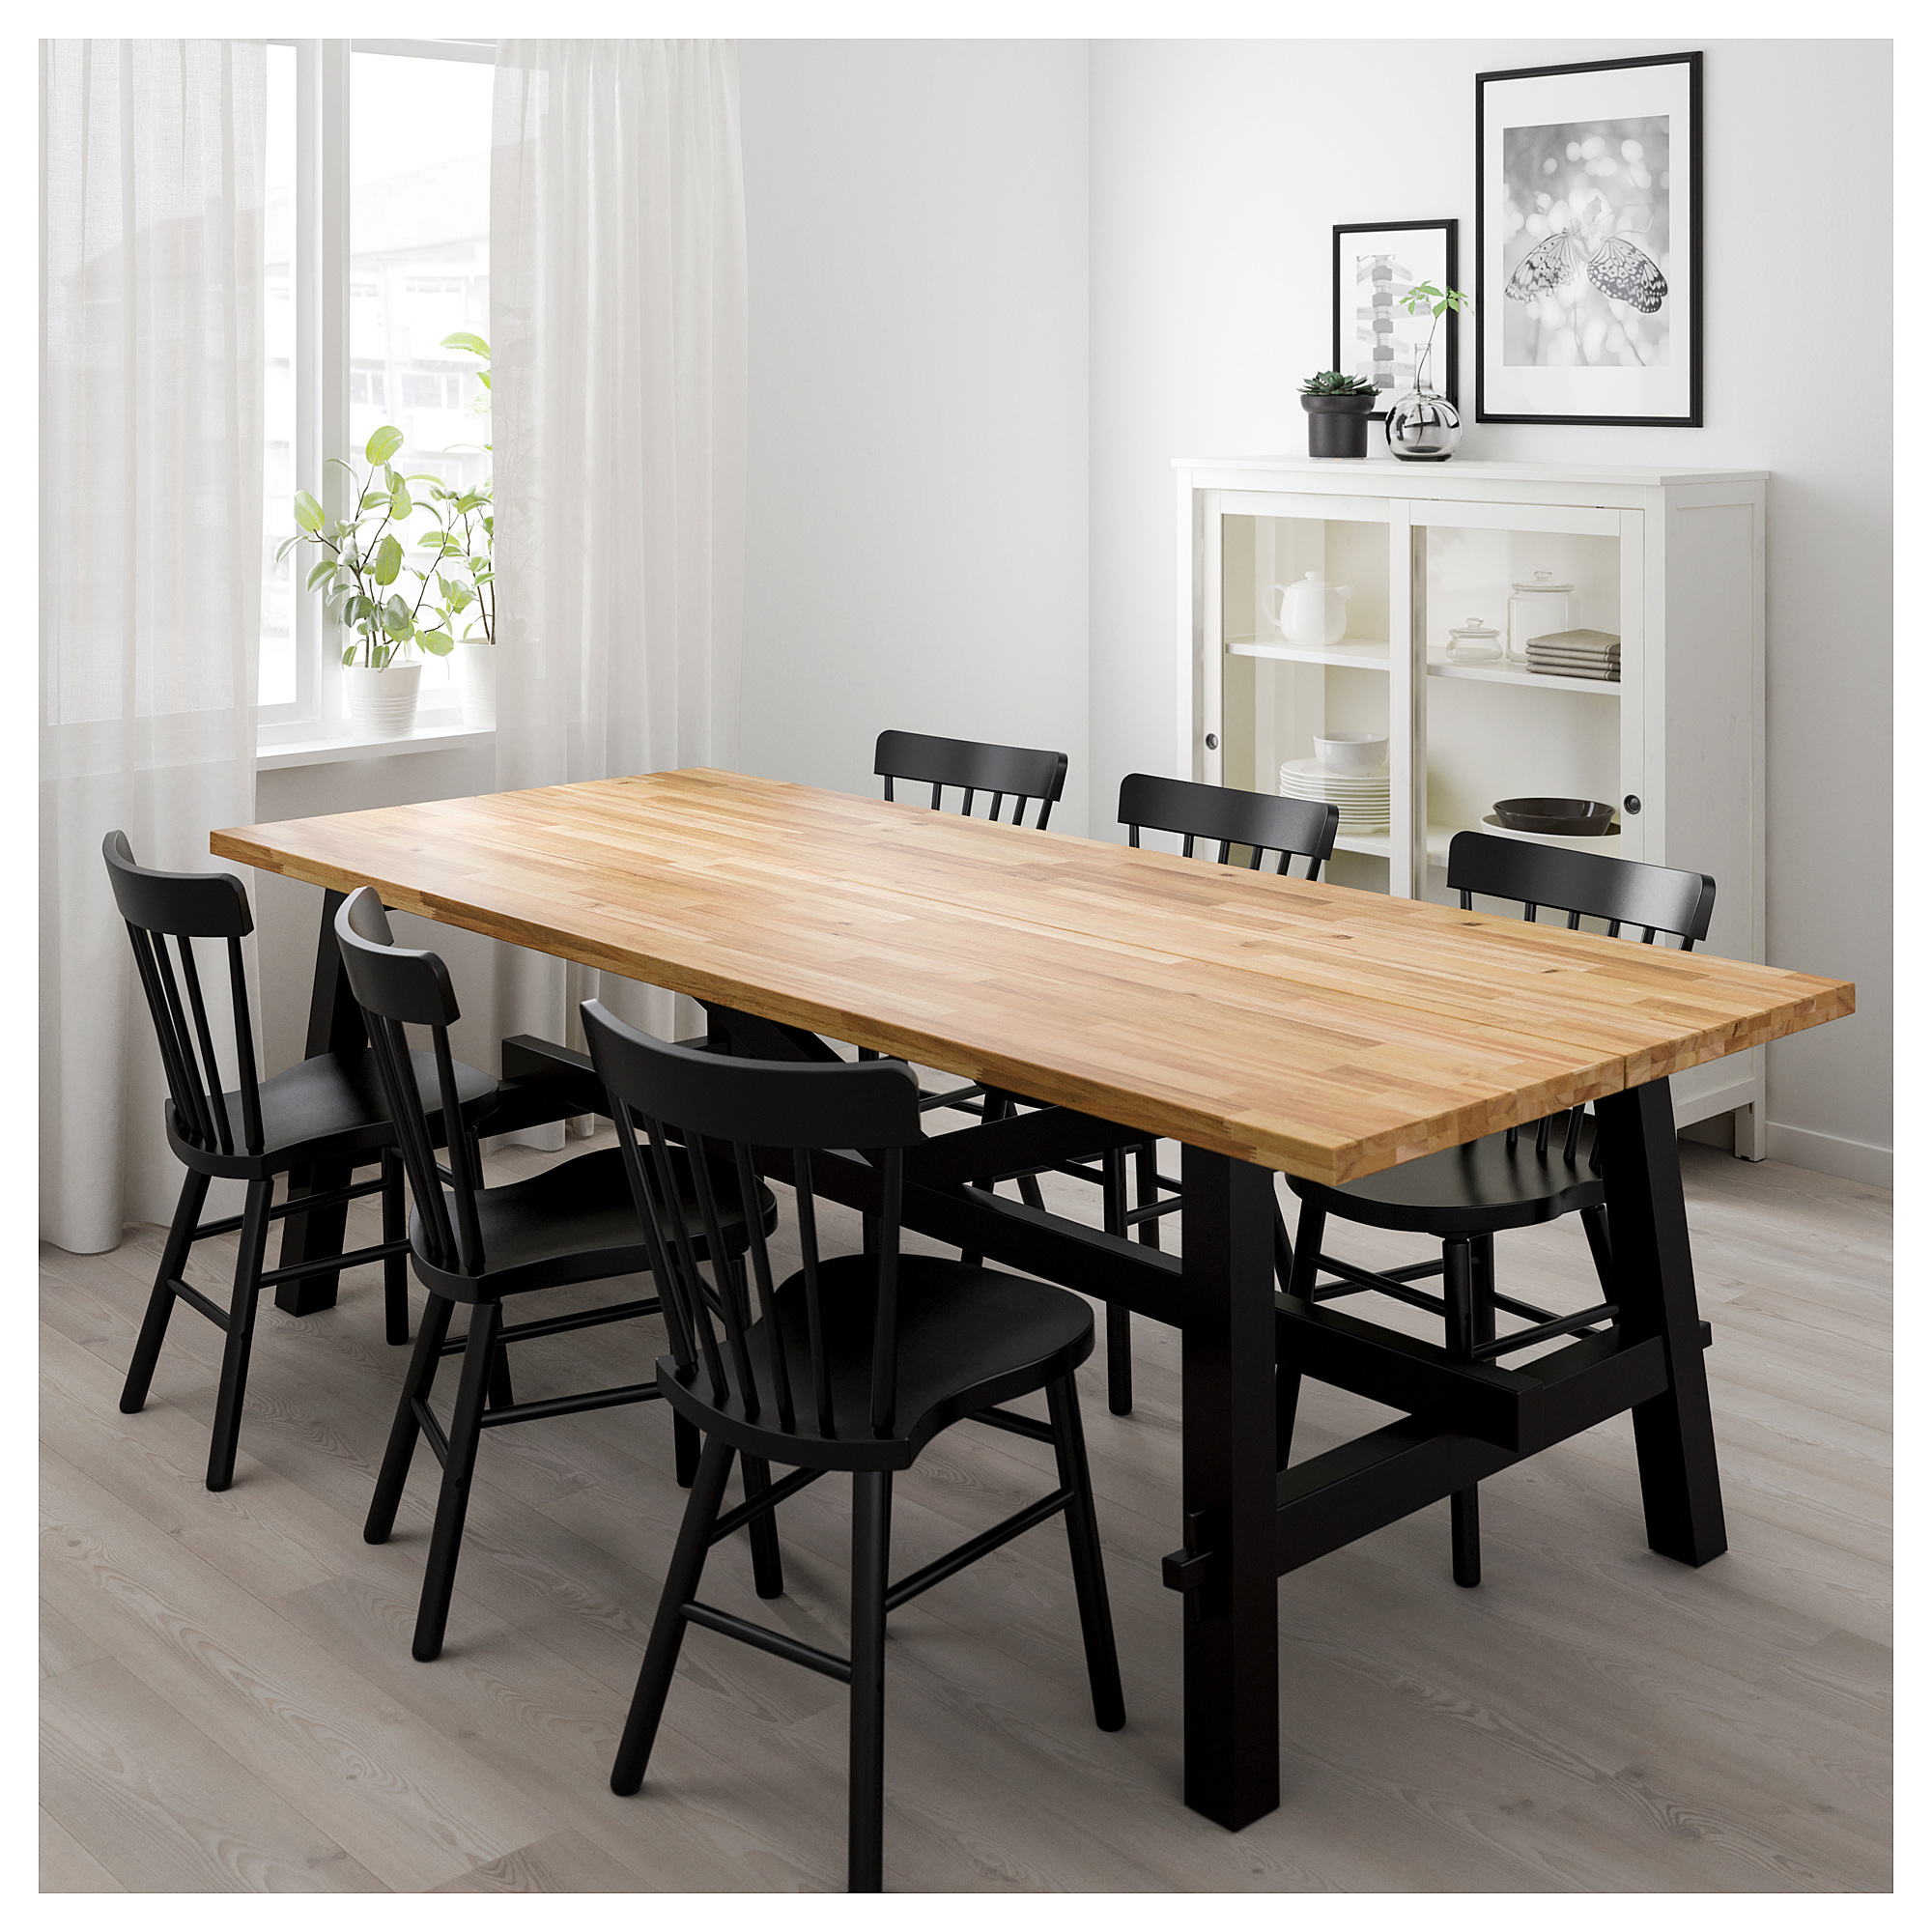 Minimalist Best Dining Table Ikea for Small Bedroom